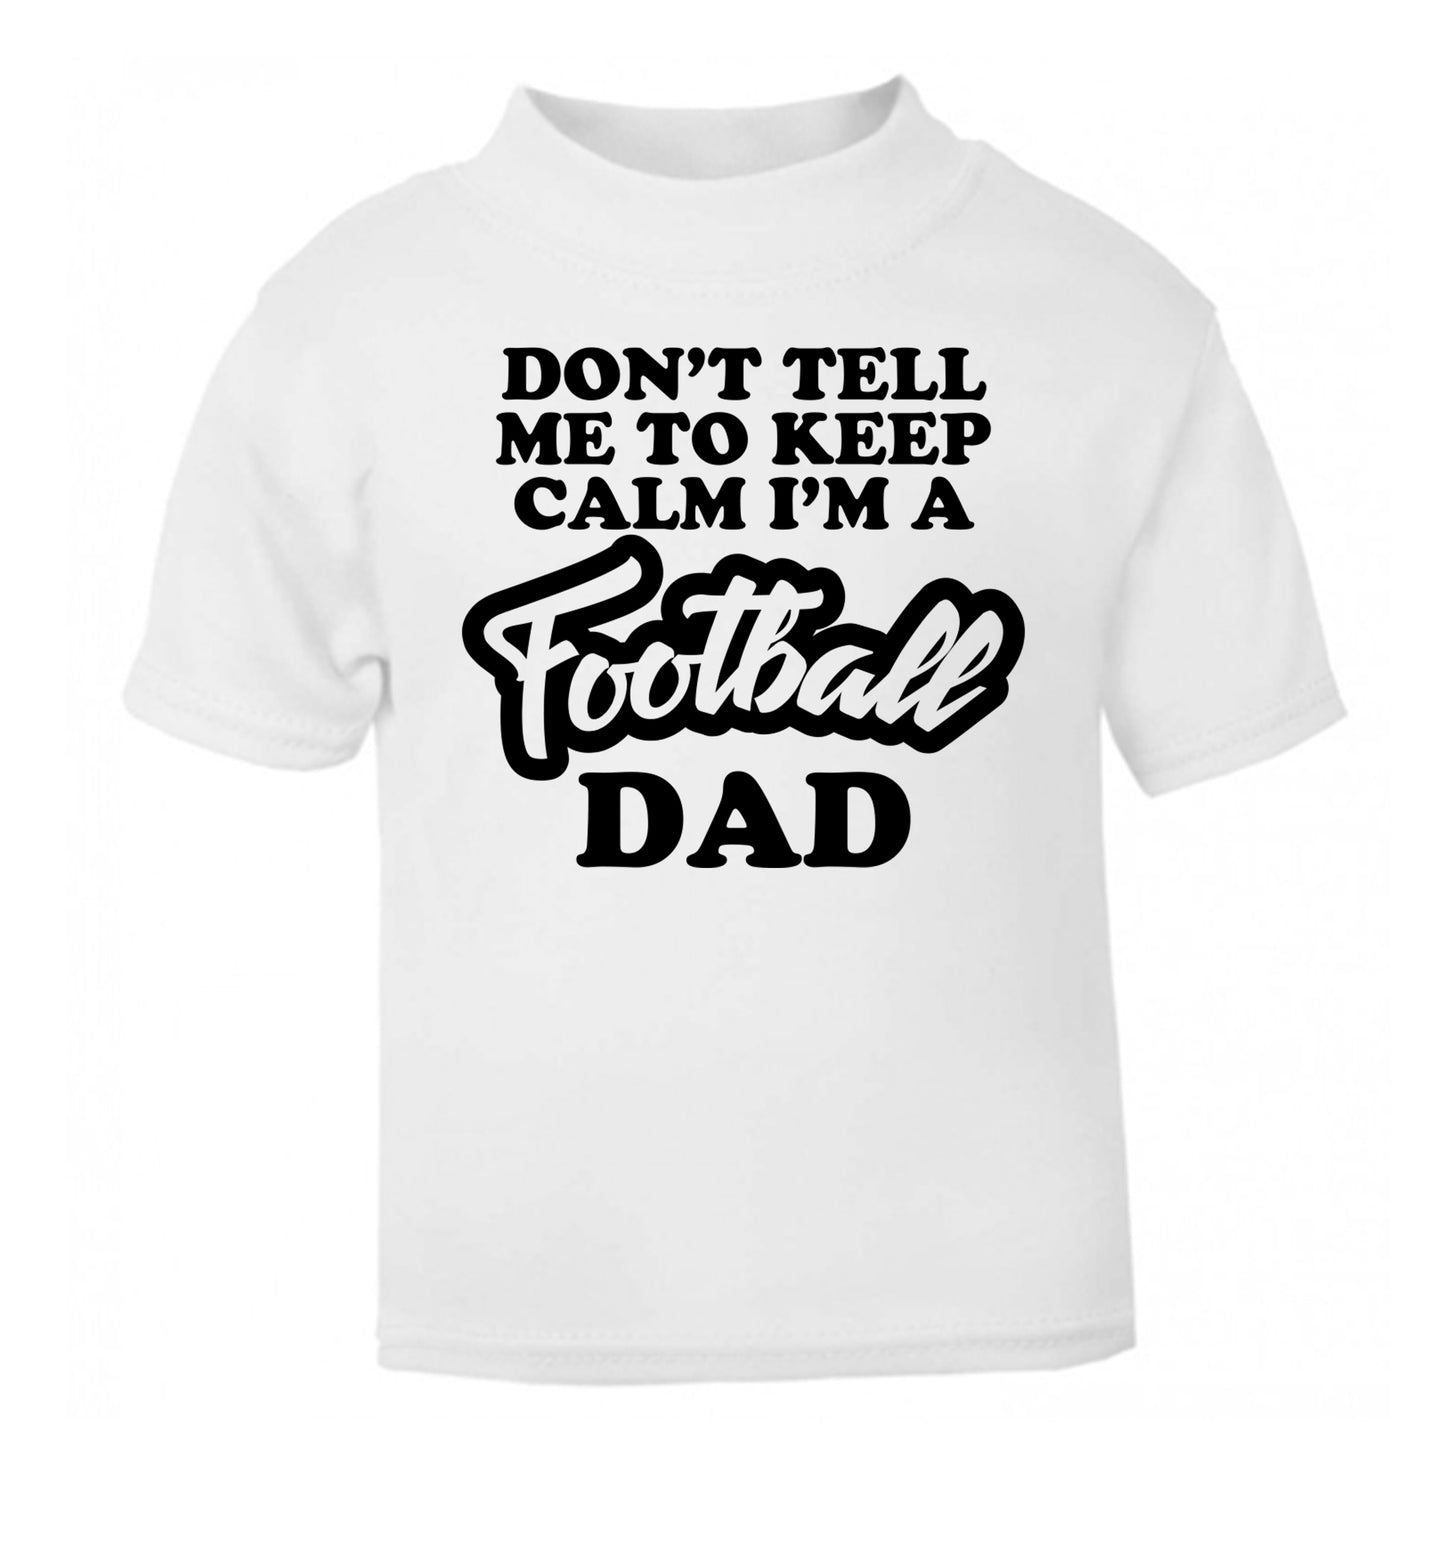 Don't tell me to keep calm I'm a football dad white Baby Toddler Tshirt 2 Years